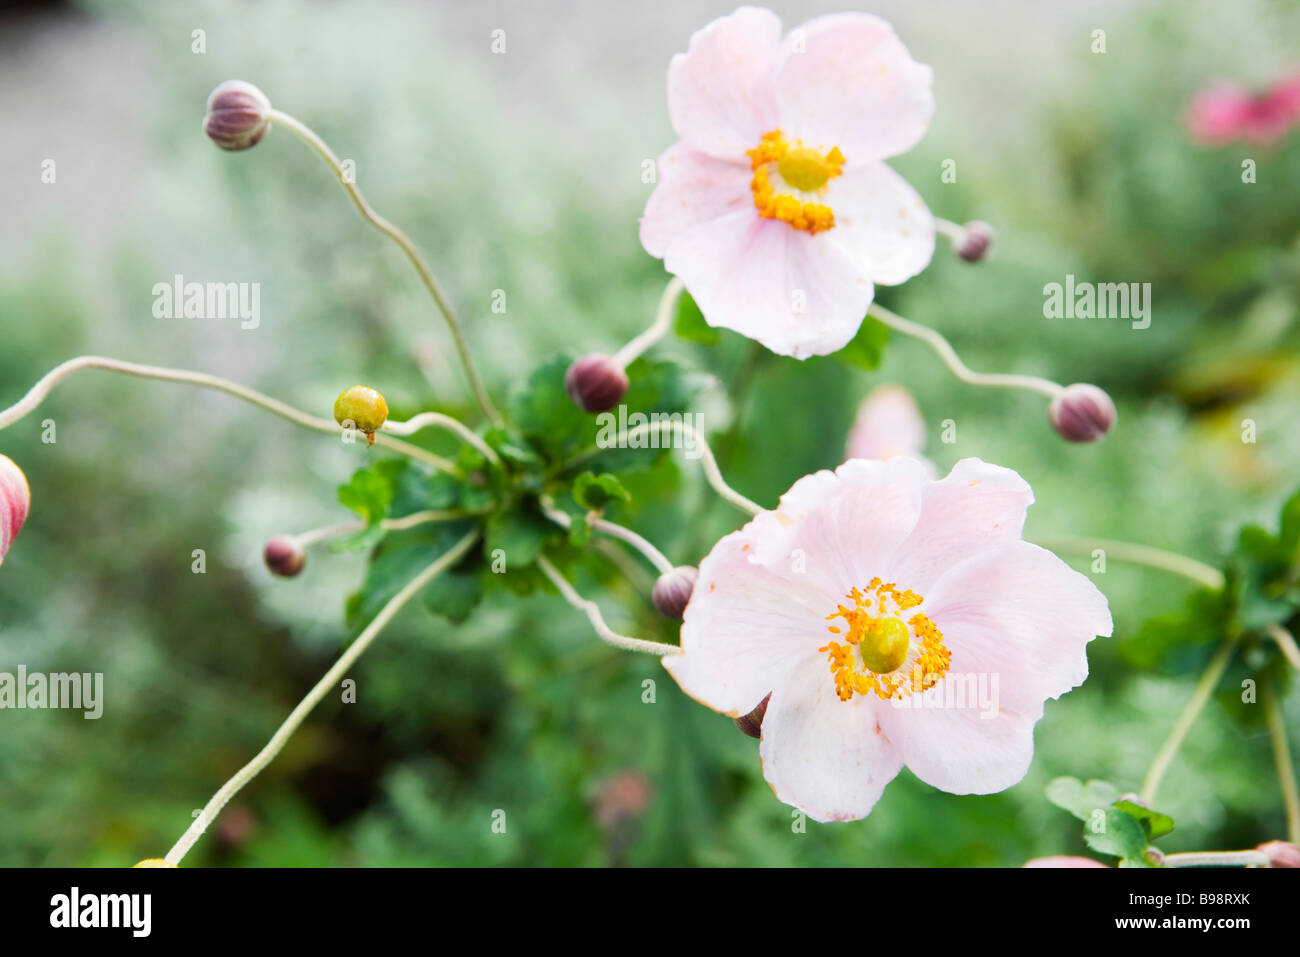 Anemone flowers and buds Stock Photo